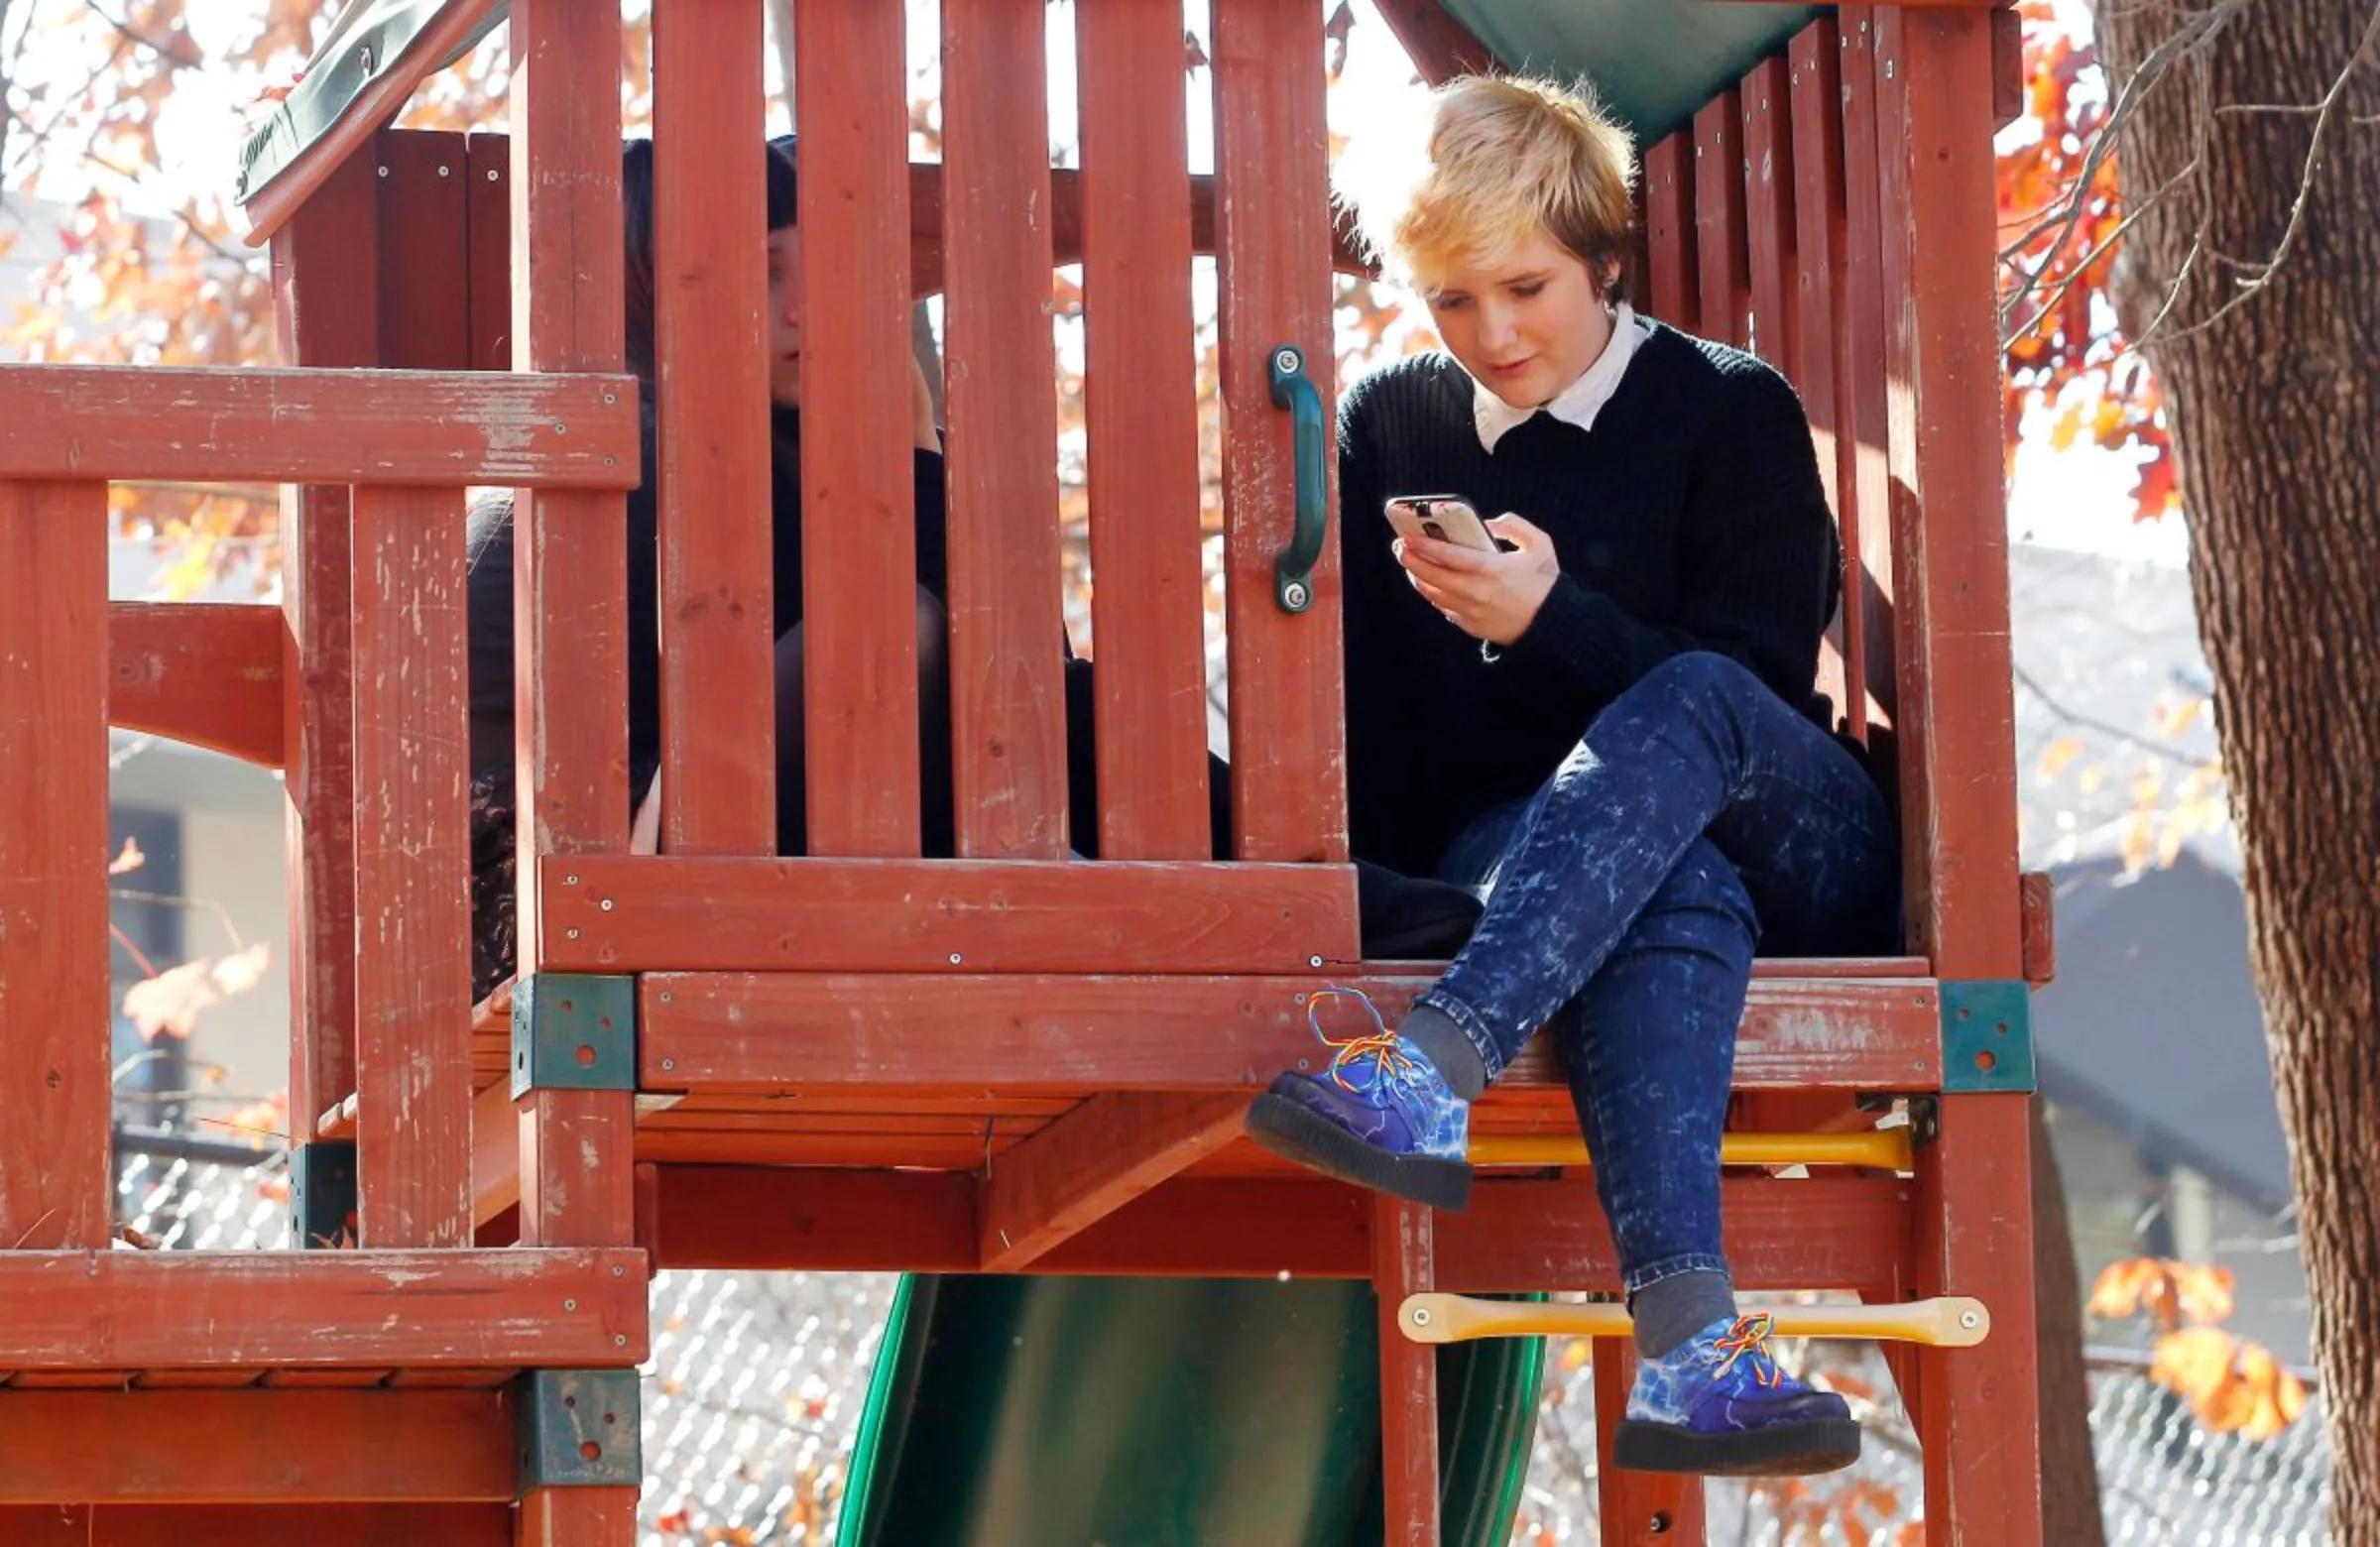 A student checks her phone during lunch outside in a treehouse at the Pride School in Atlanta, Georgia, U.S. on December 7, 2016